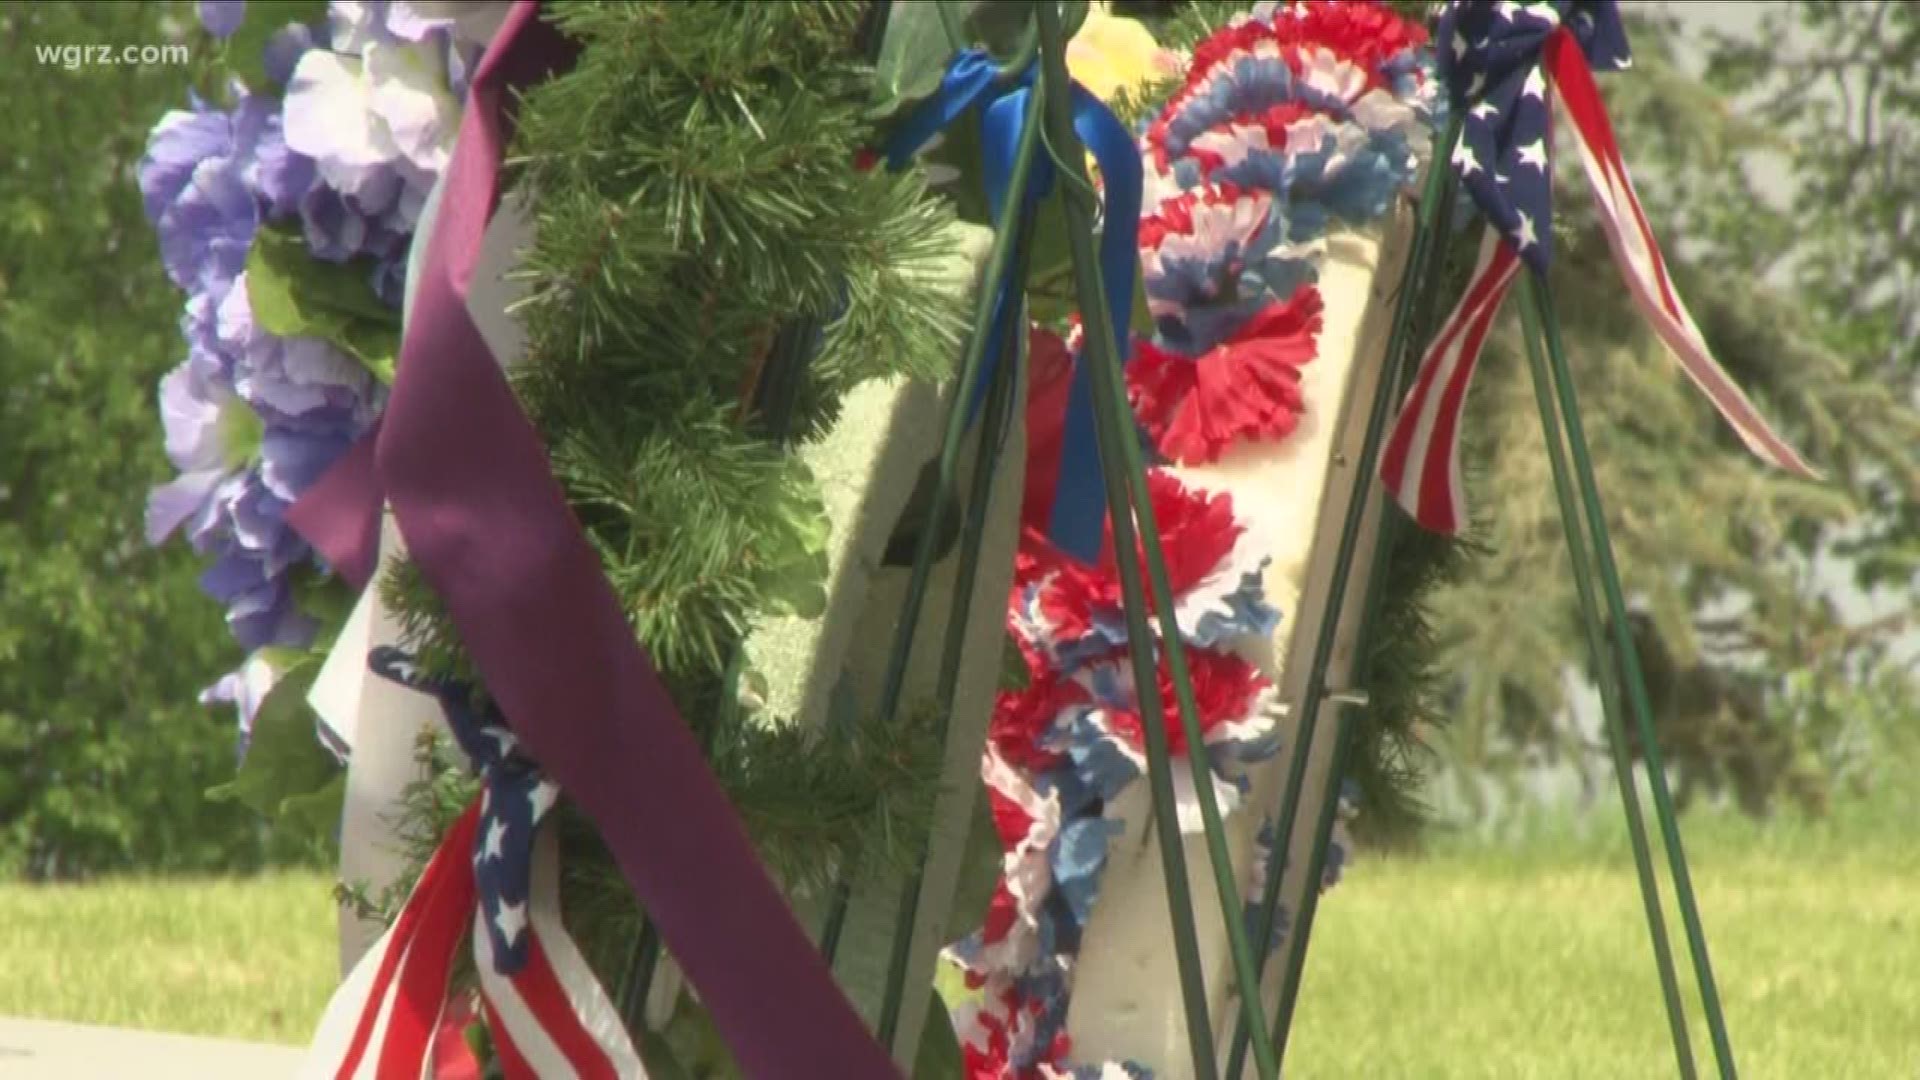 Saturday's theme in Niagara Falls was honoring those killed in action during the Korean War.